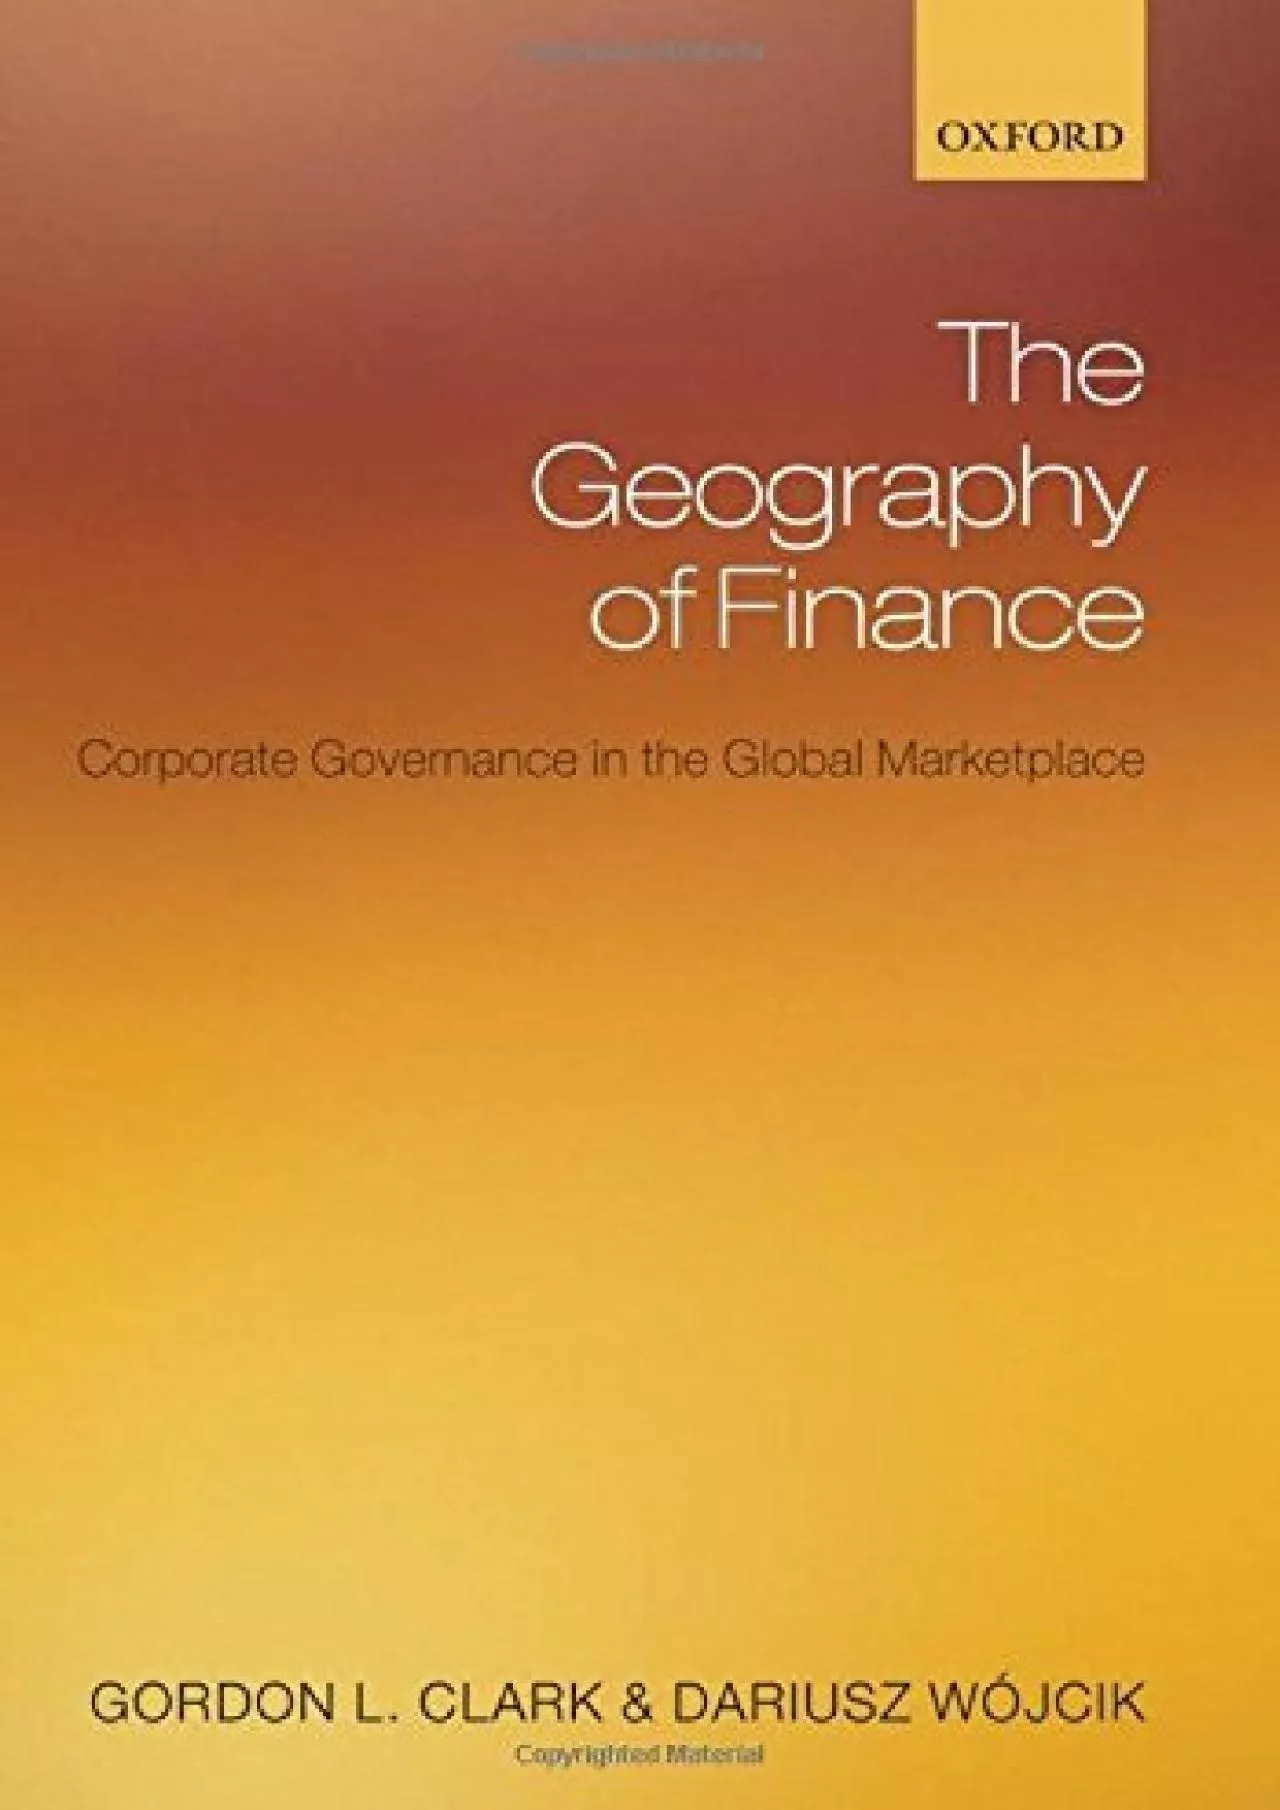 The Geography of Finance: Corporate Governance in a Global Marketplace: Corporate Governance